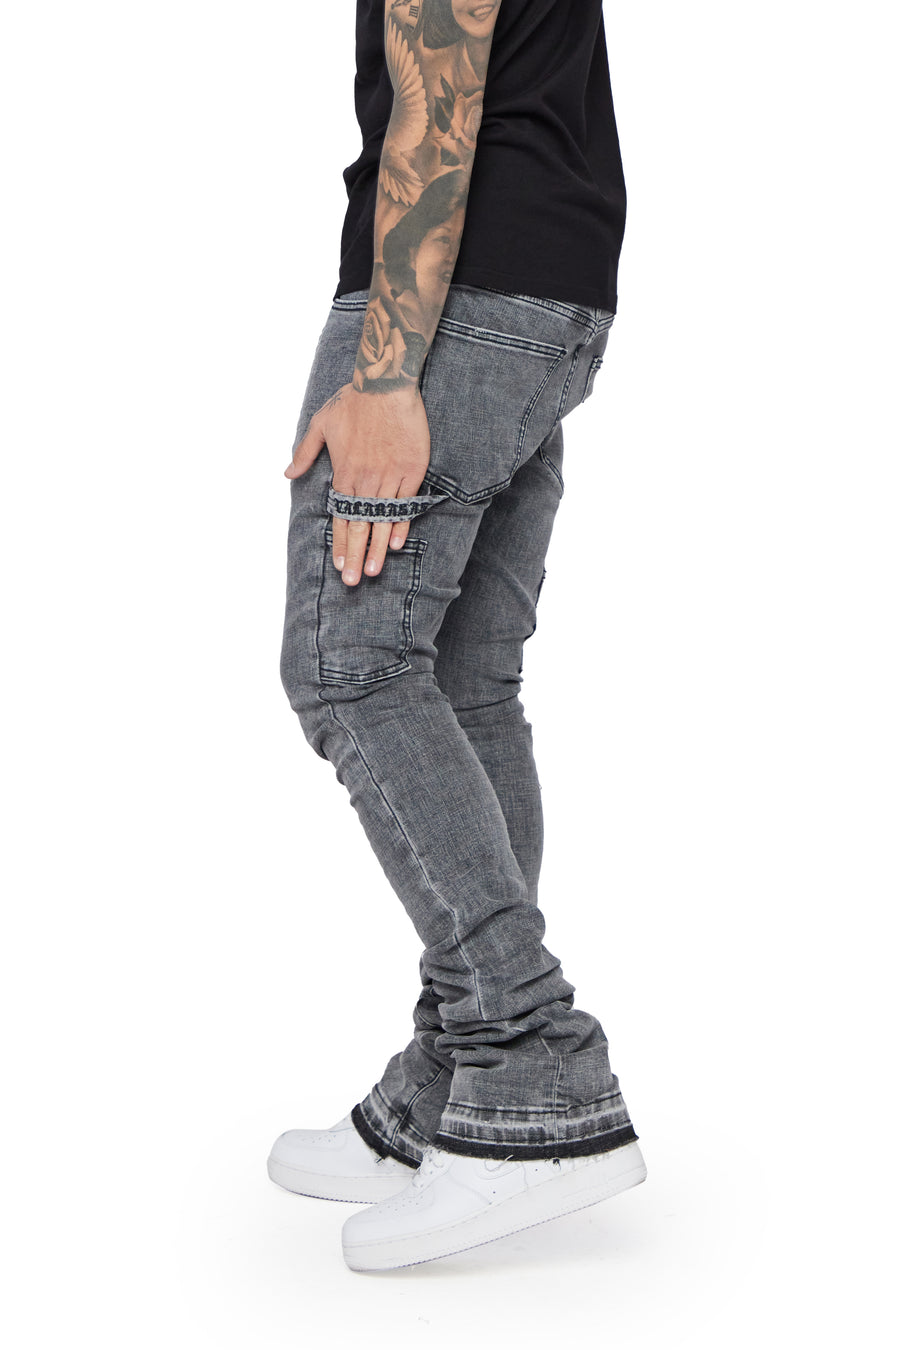 "MR. EXTENDO" LT. GREY WASHED STACKED FLARE JEAN